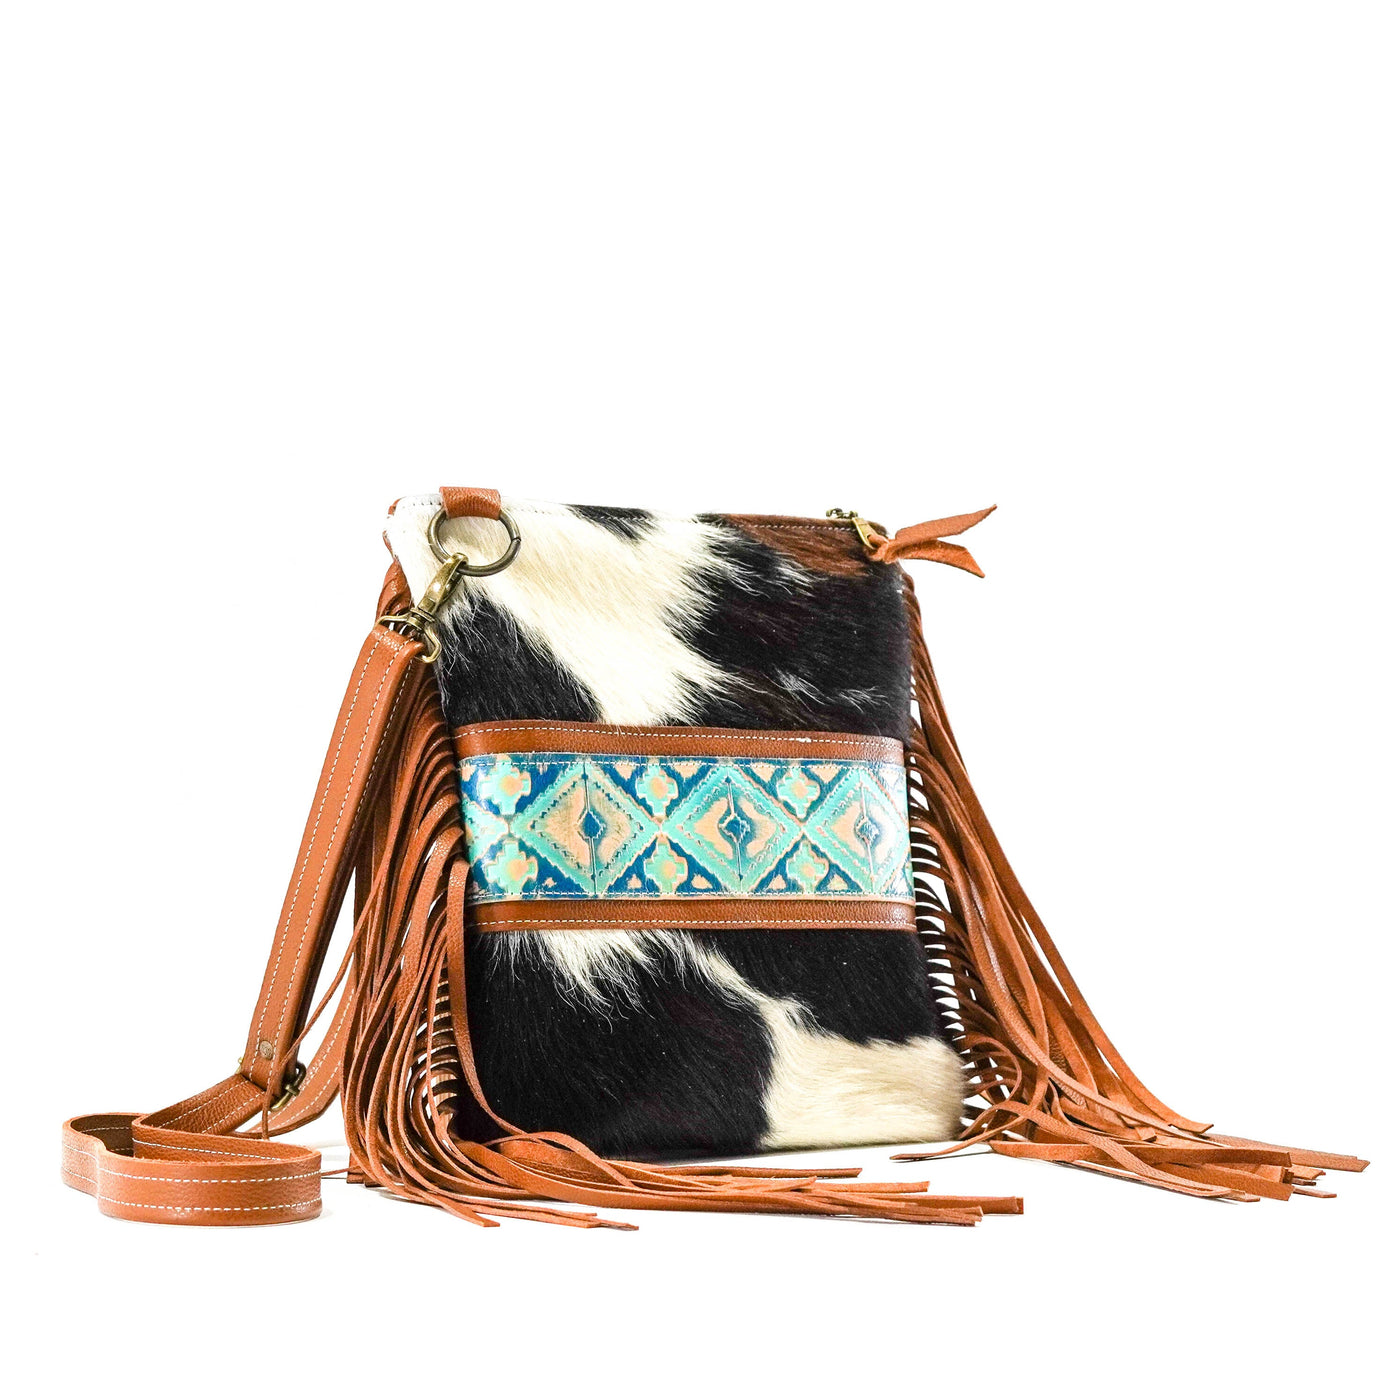 Shania - Tricolor w/ Margaritaville Navajo-Shania-Western-Cowhide-Bags-Handmade-Products-Gifts-Dancing Cactus Designs